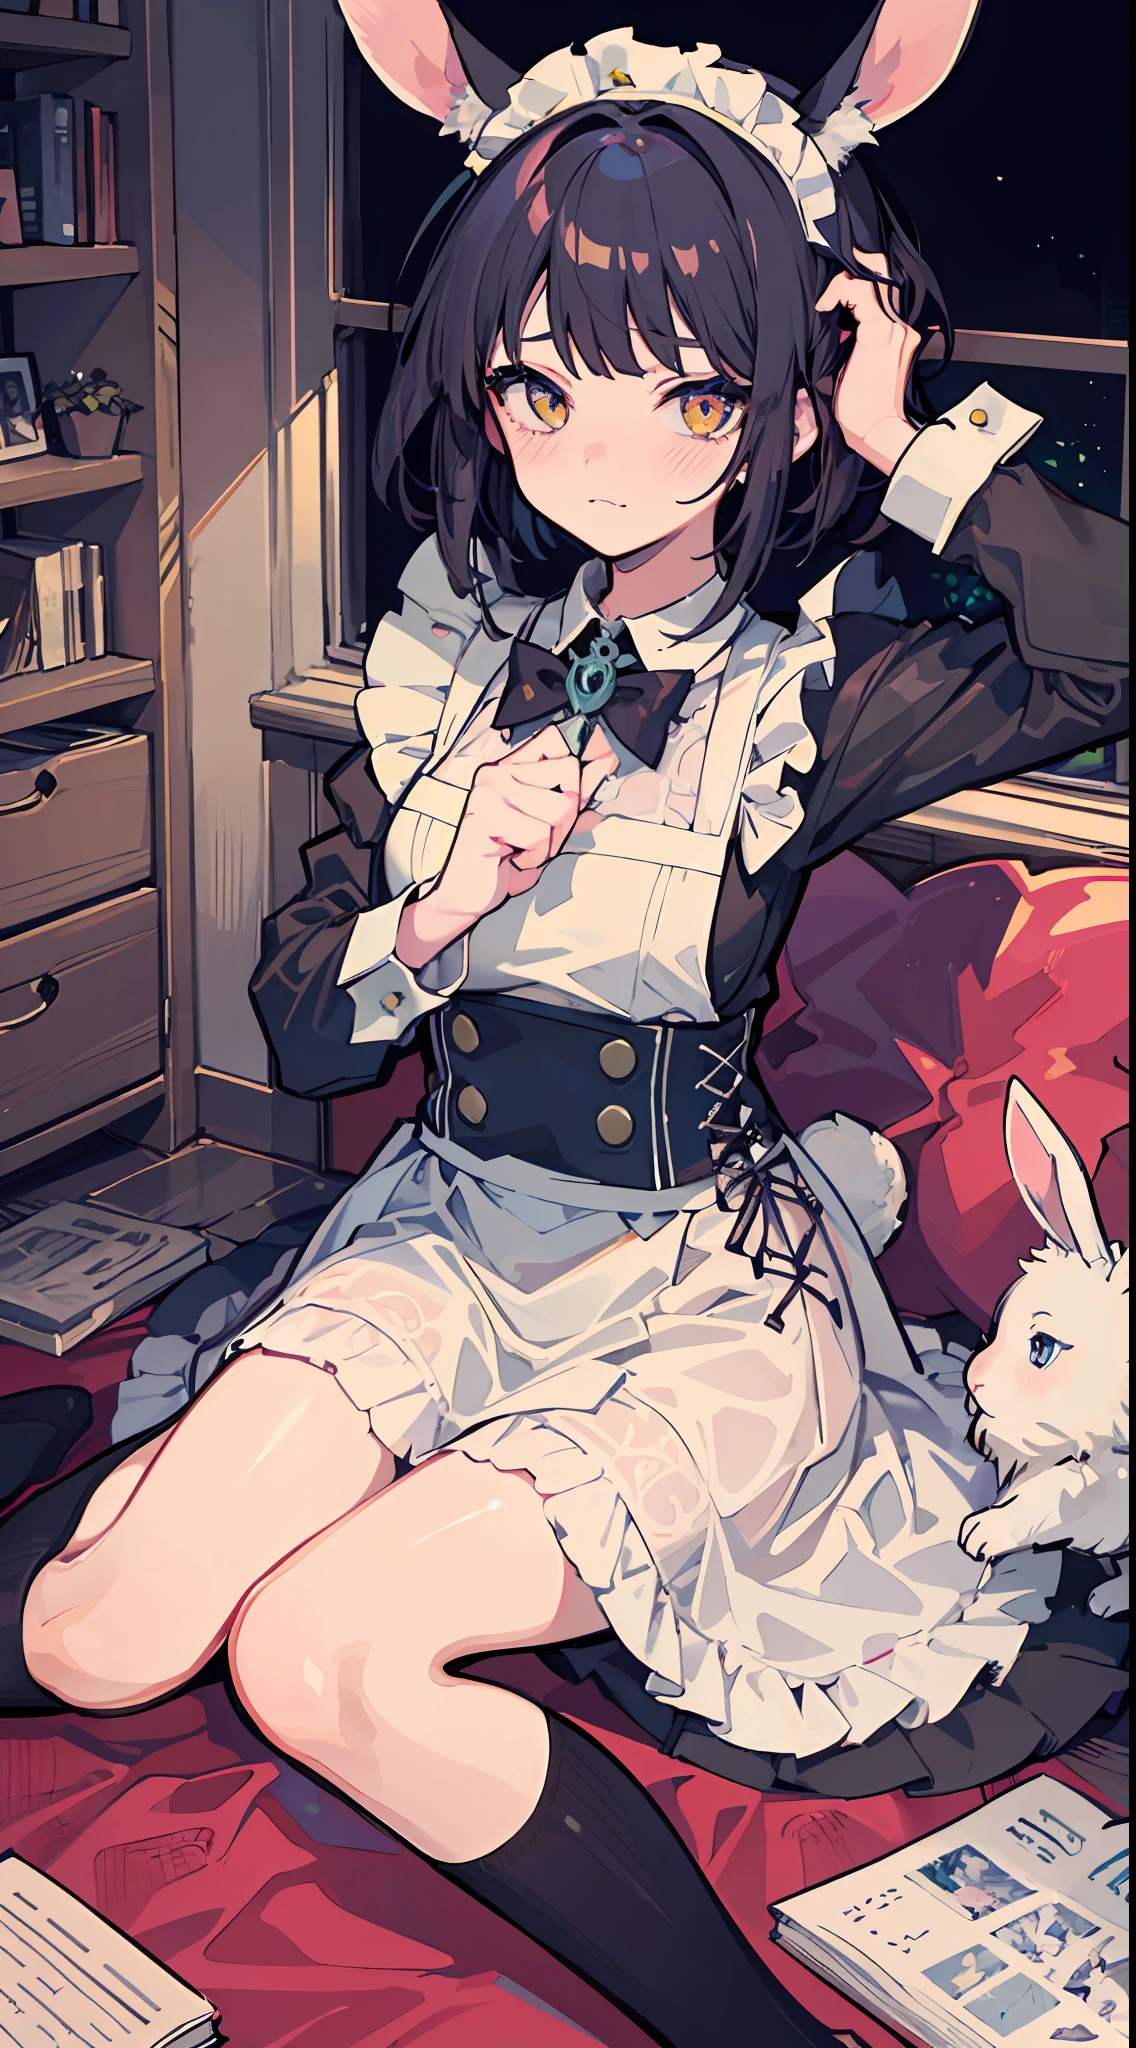 This illustration shows a girl sitting on the floor，She transforms into the image of a bunny girl，The illustration presents a very detailed cover art effect。The scene is depicted very delicately。She is dressed in a role-play costume in a maid costume，The whole gives a sense of innocence，There is a love motif in the picture，The overall picture has a jagged edge effect，Taken together，This illustration creates a naïve scene，Featuring the image of a bunny girl，And mixed with elements of Lovecraft， Embarrassing face　Embarrassed cheeks turning red　Startled　surprise